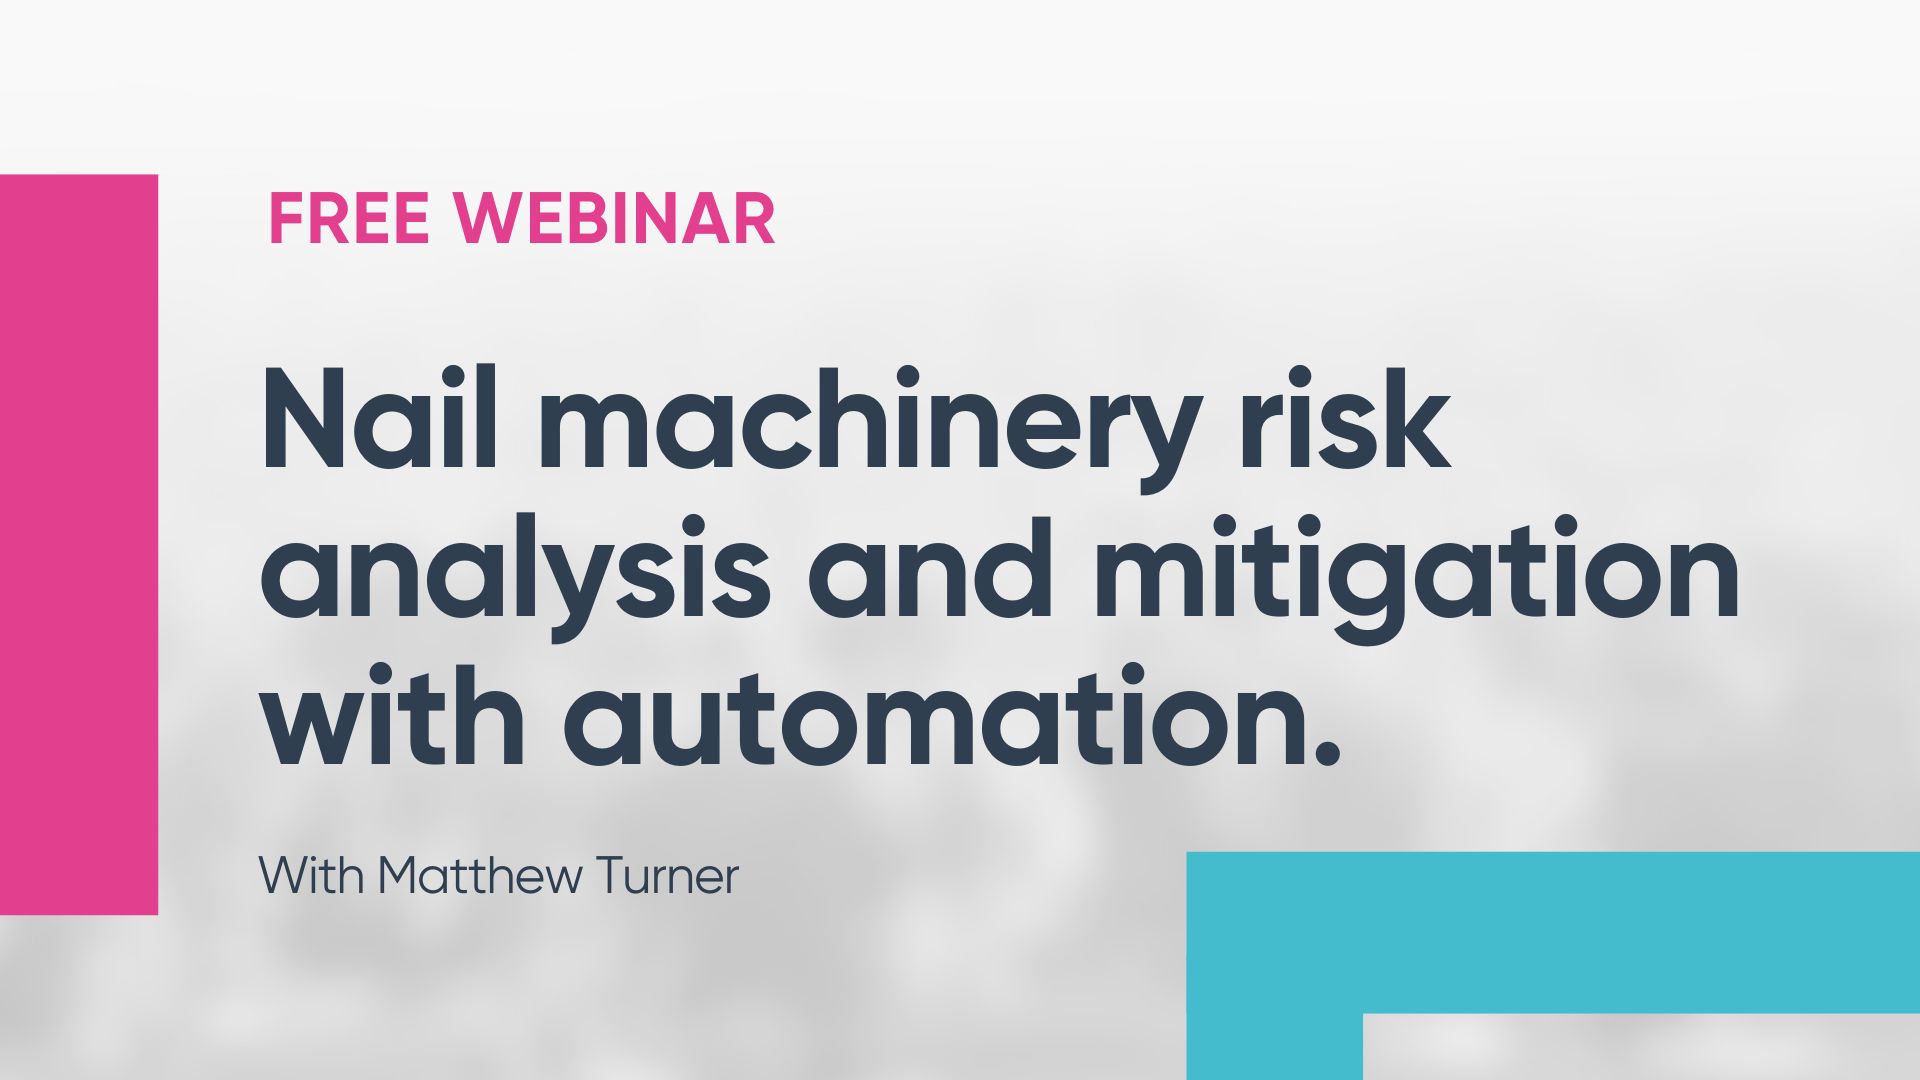 Machinery risk analysis and mitigation with automation webinar